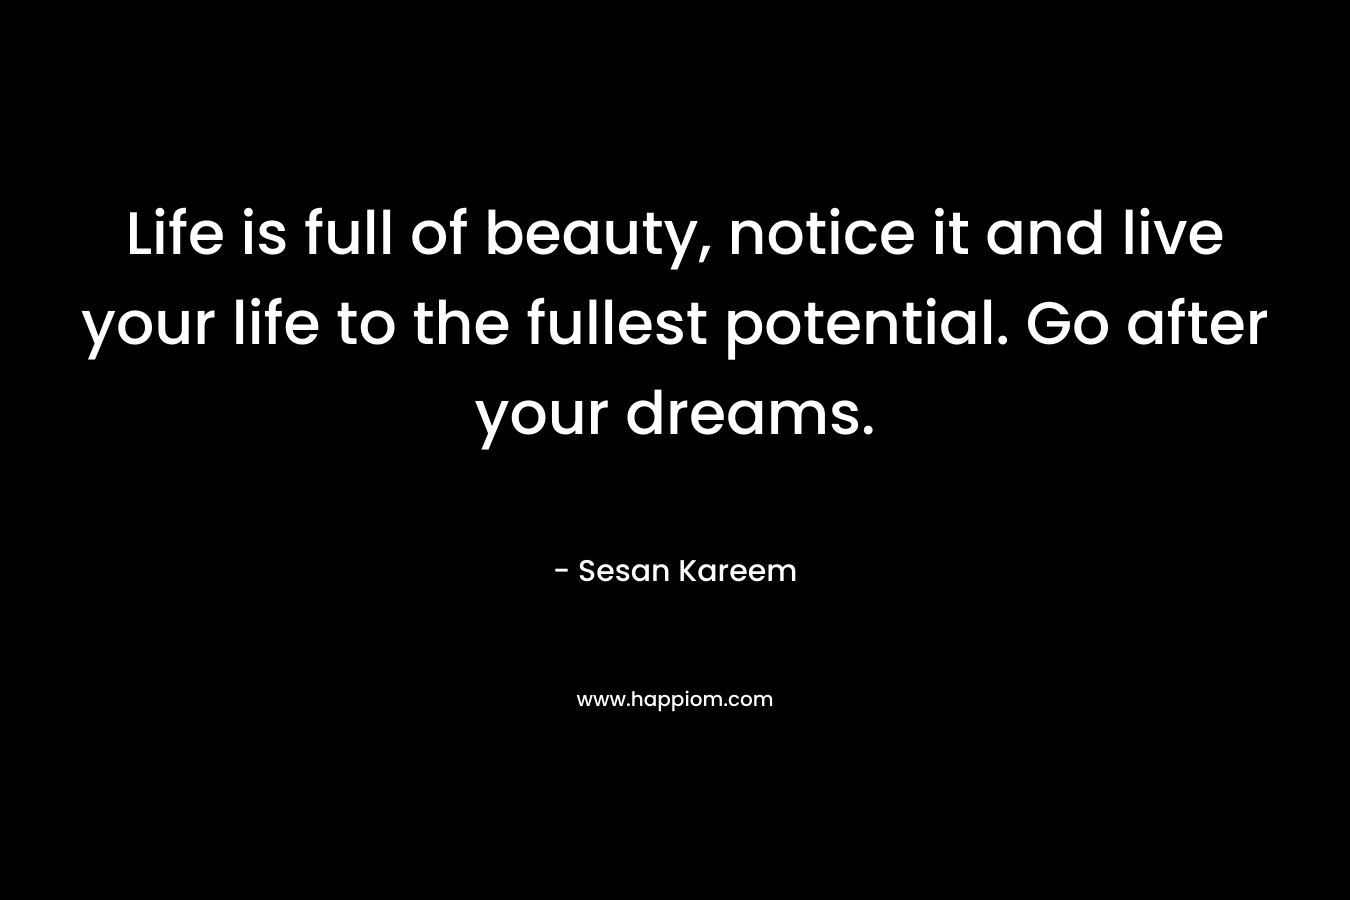 Life is full of beauty, notice it and live your life to the fullest potential. Go after your dreams.